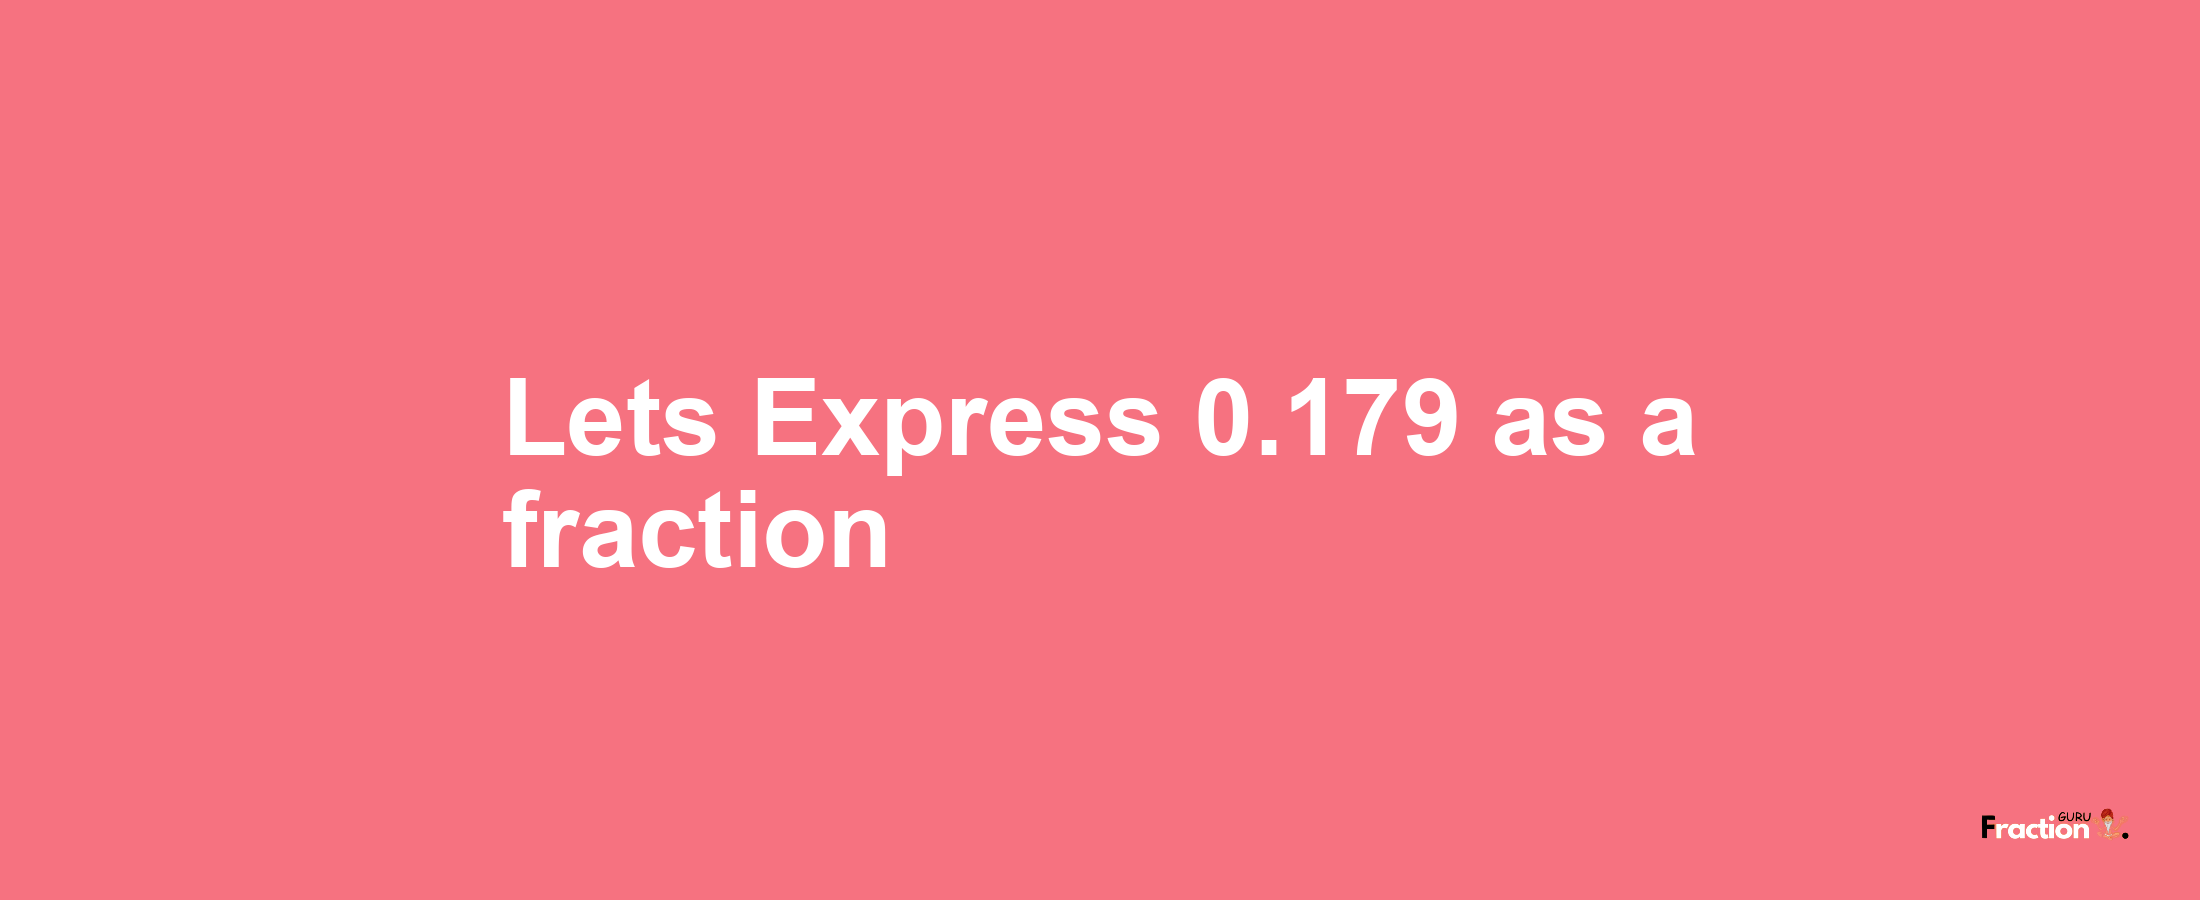 Lets Express 0.179 as afraction